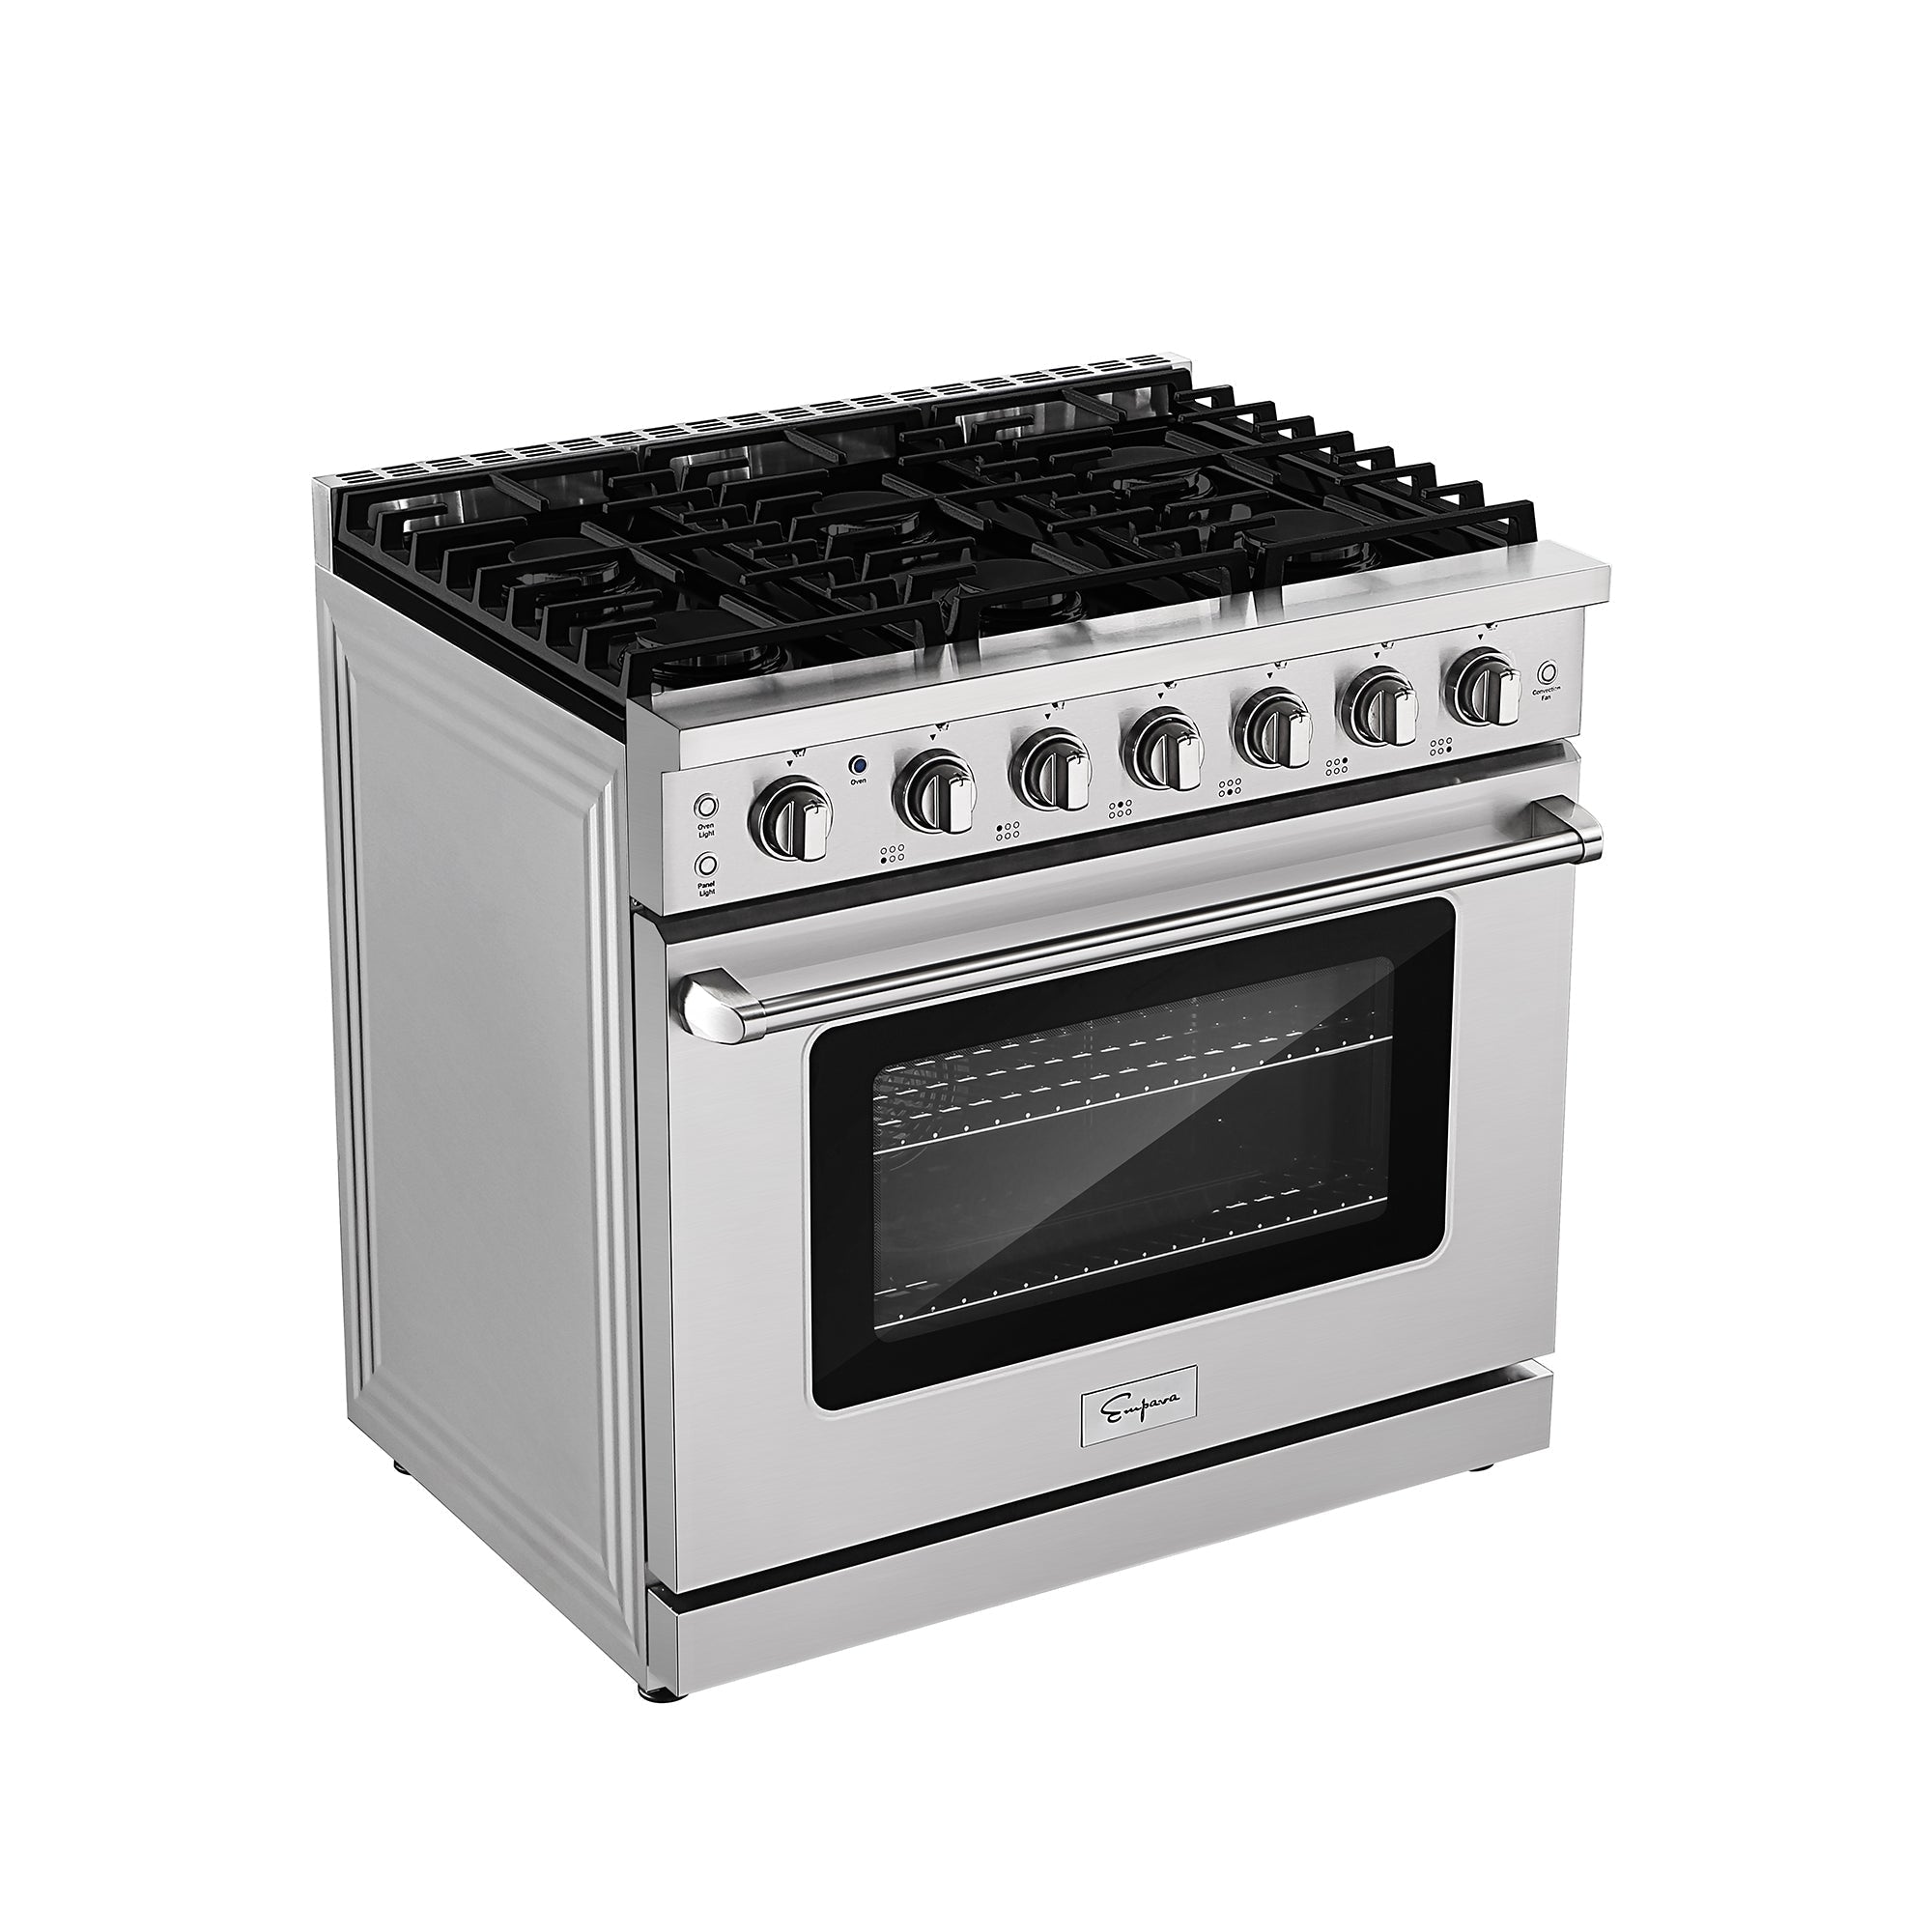 Empava 36 in. Pro-Style Freestanding Gas on Gas Range in Stainless Steel (36GR11)